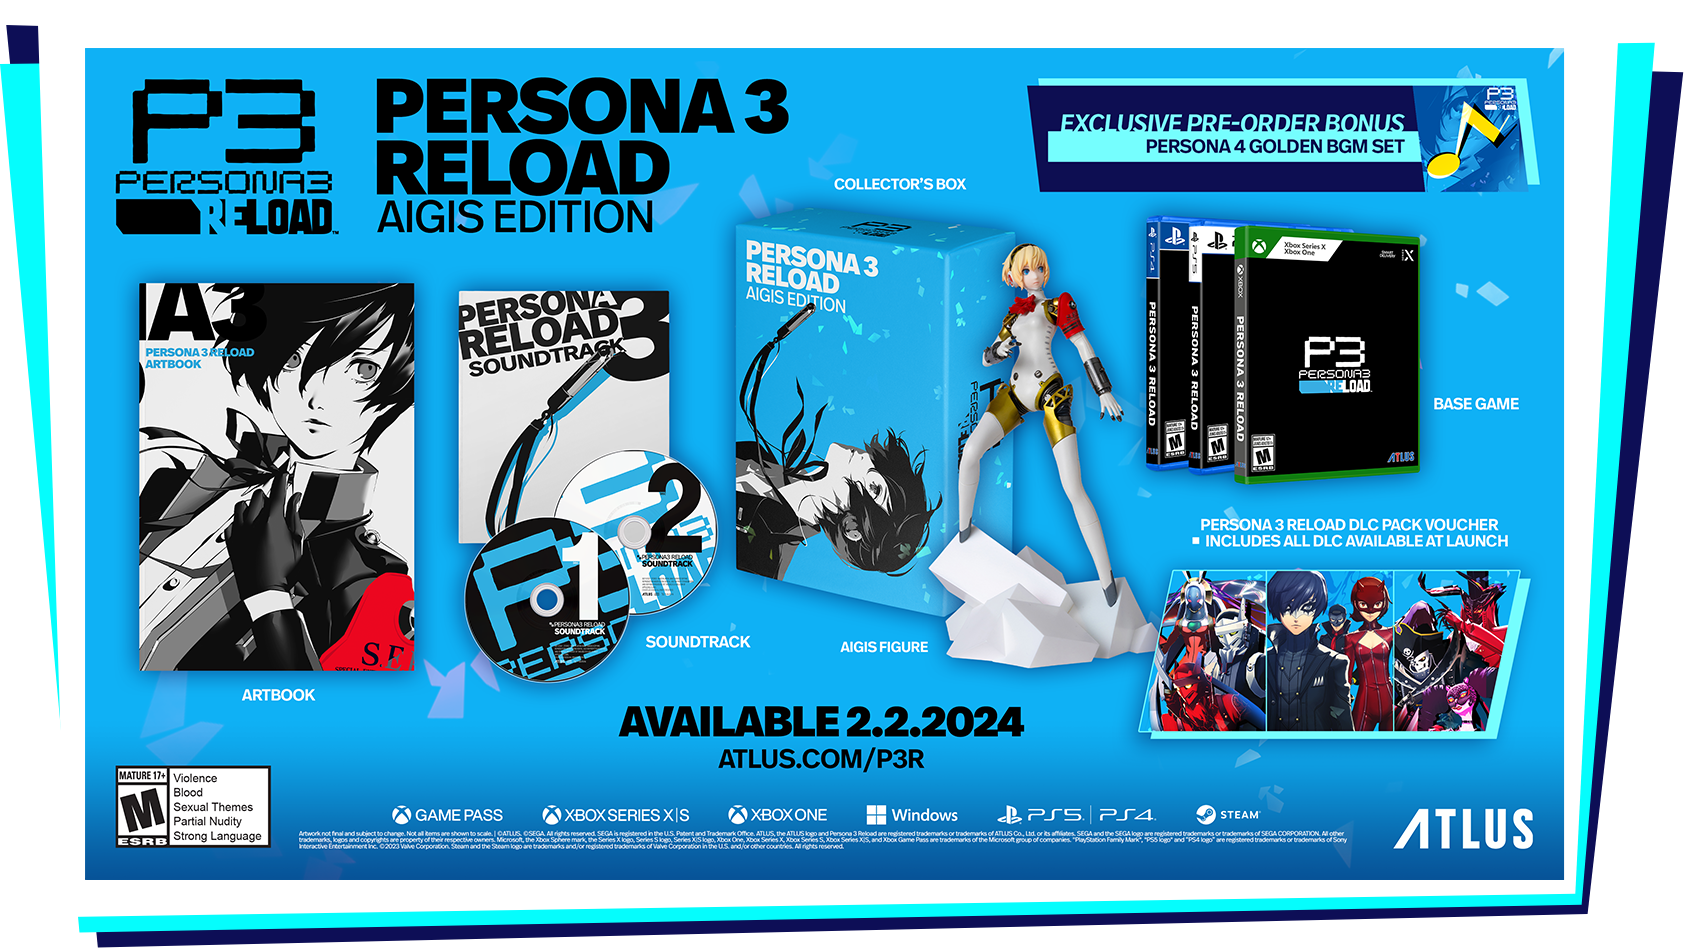 New Persona 3 Reload trailer announces release date and new features ...